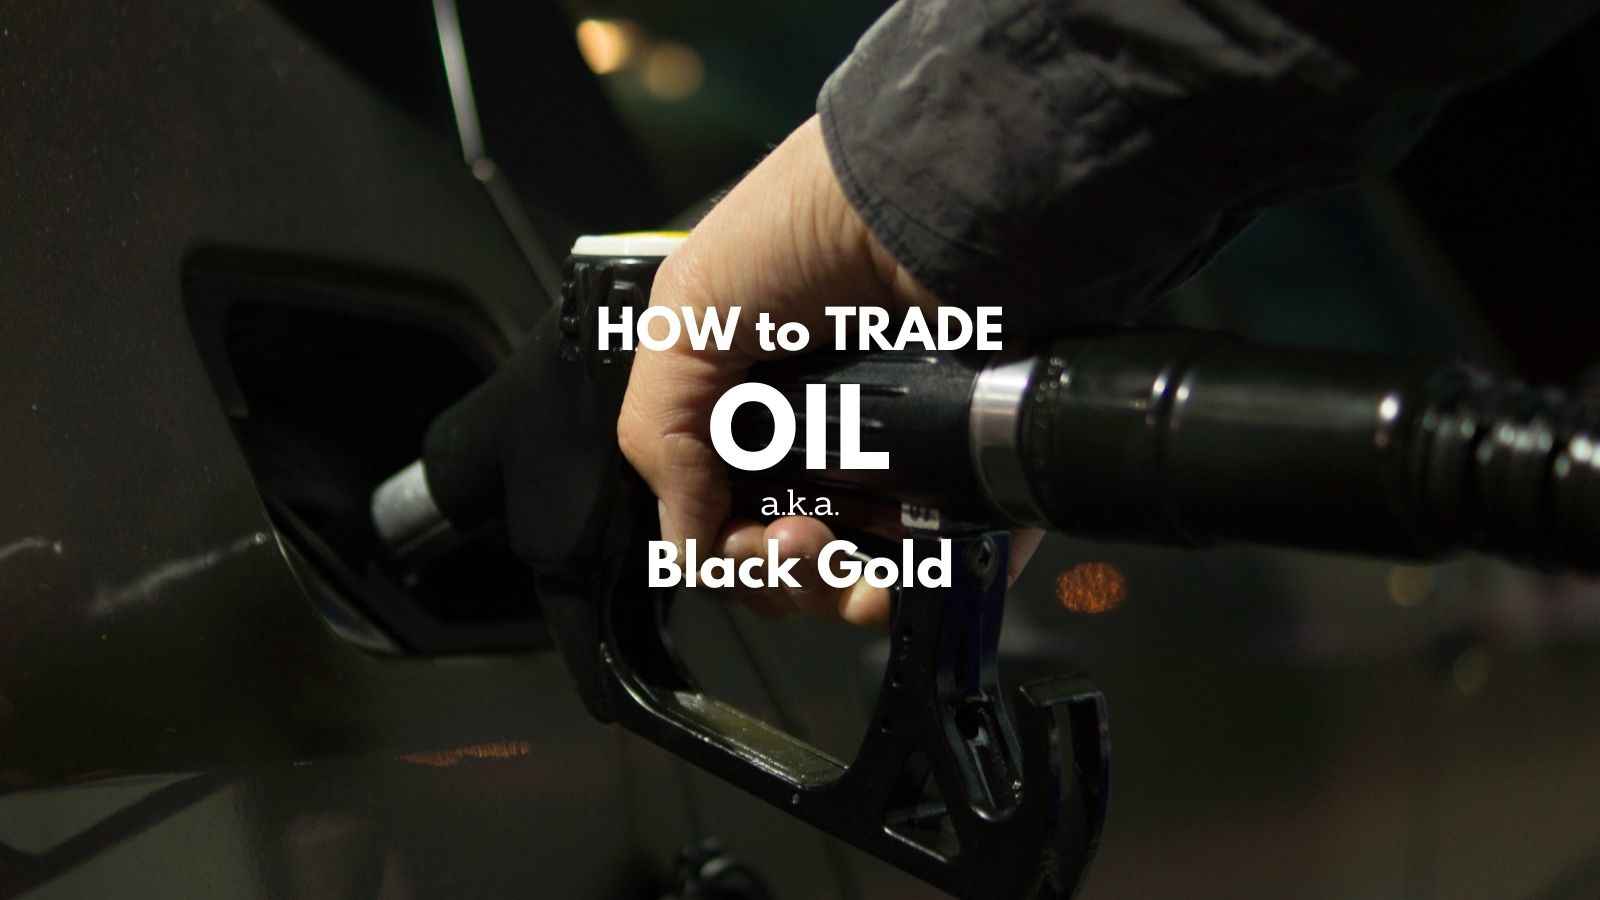 ways how to trade oil black gold